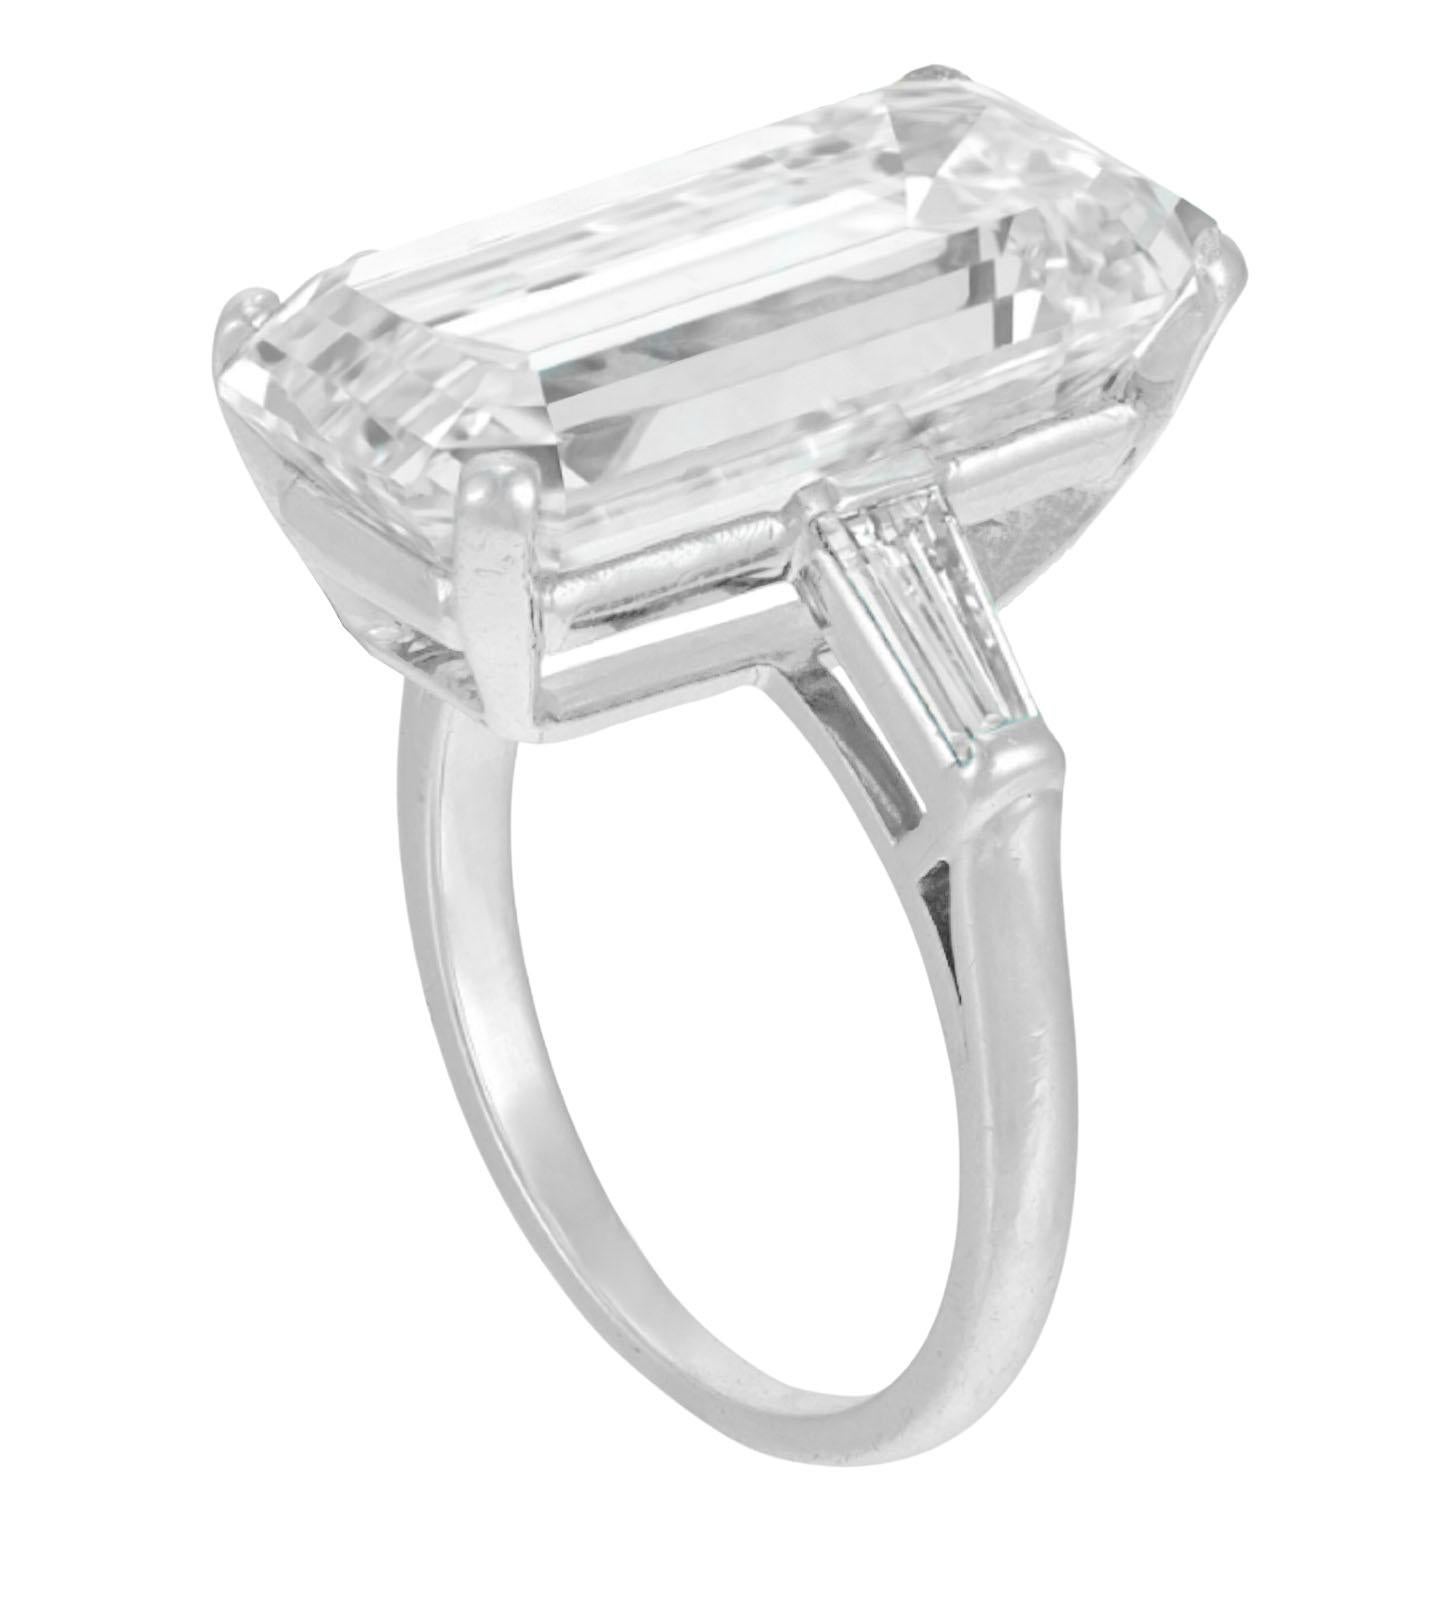 Contemporary GIA Certified 12 Carat Emerald Cut FLAWLESS D COLOR Type IIA Diamond Ring For Sale